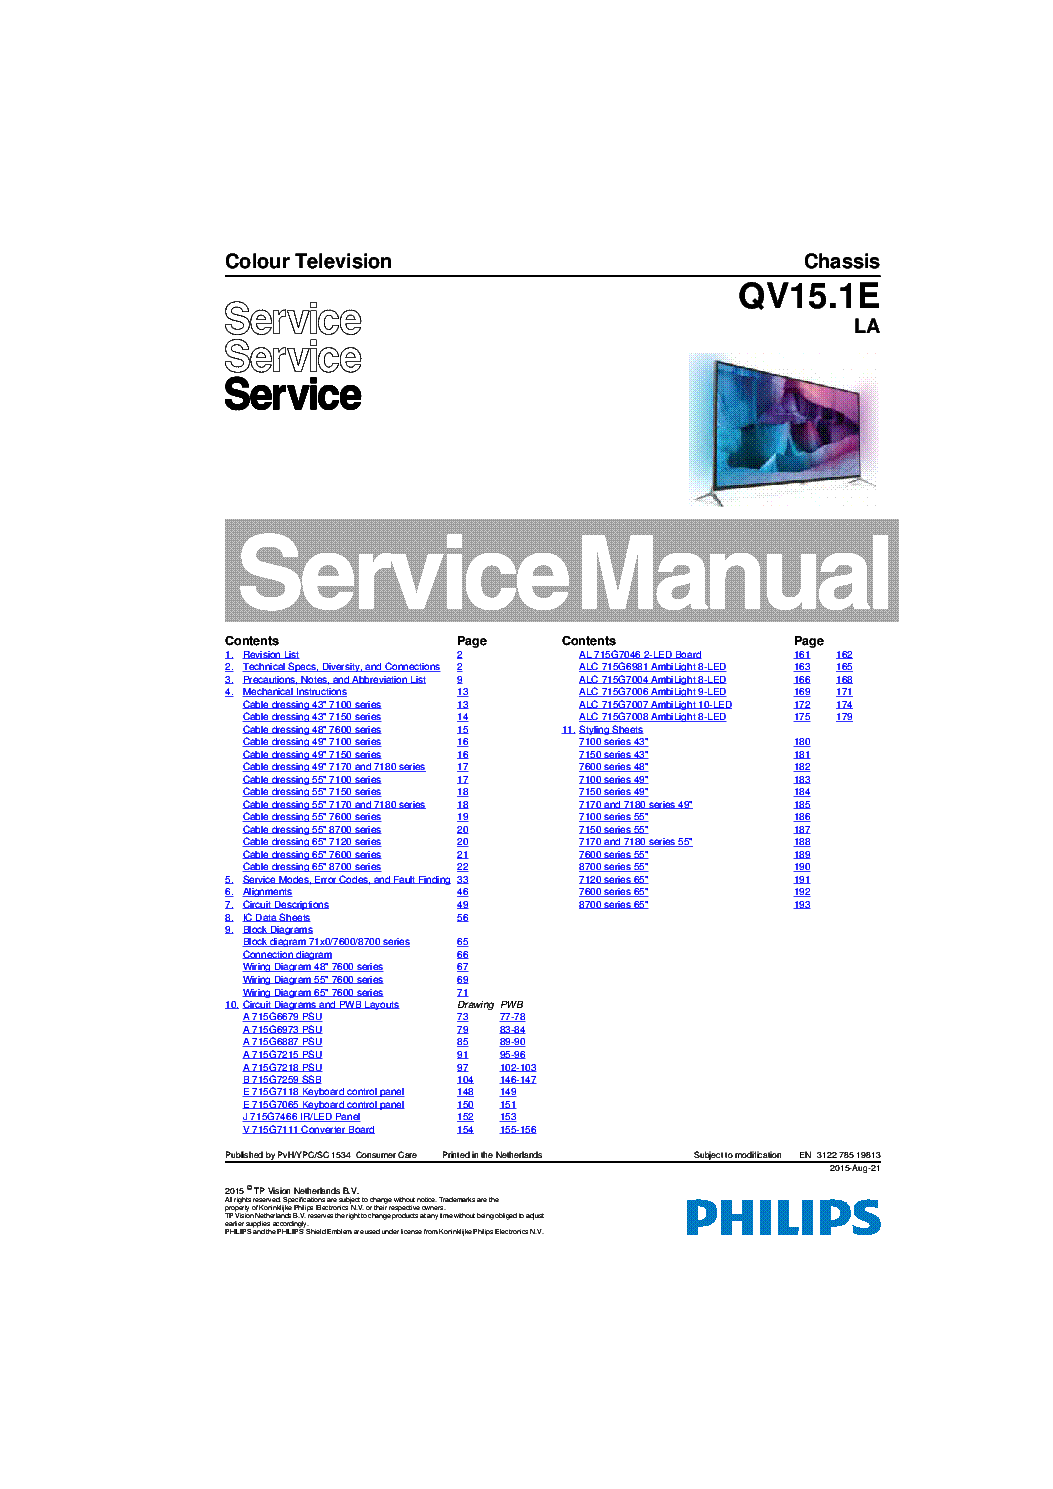 PHILIPS QV15.1ELA CHASSIS 312278519813 150821 service manual (1st page)